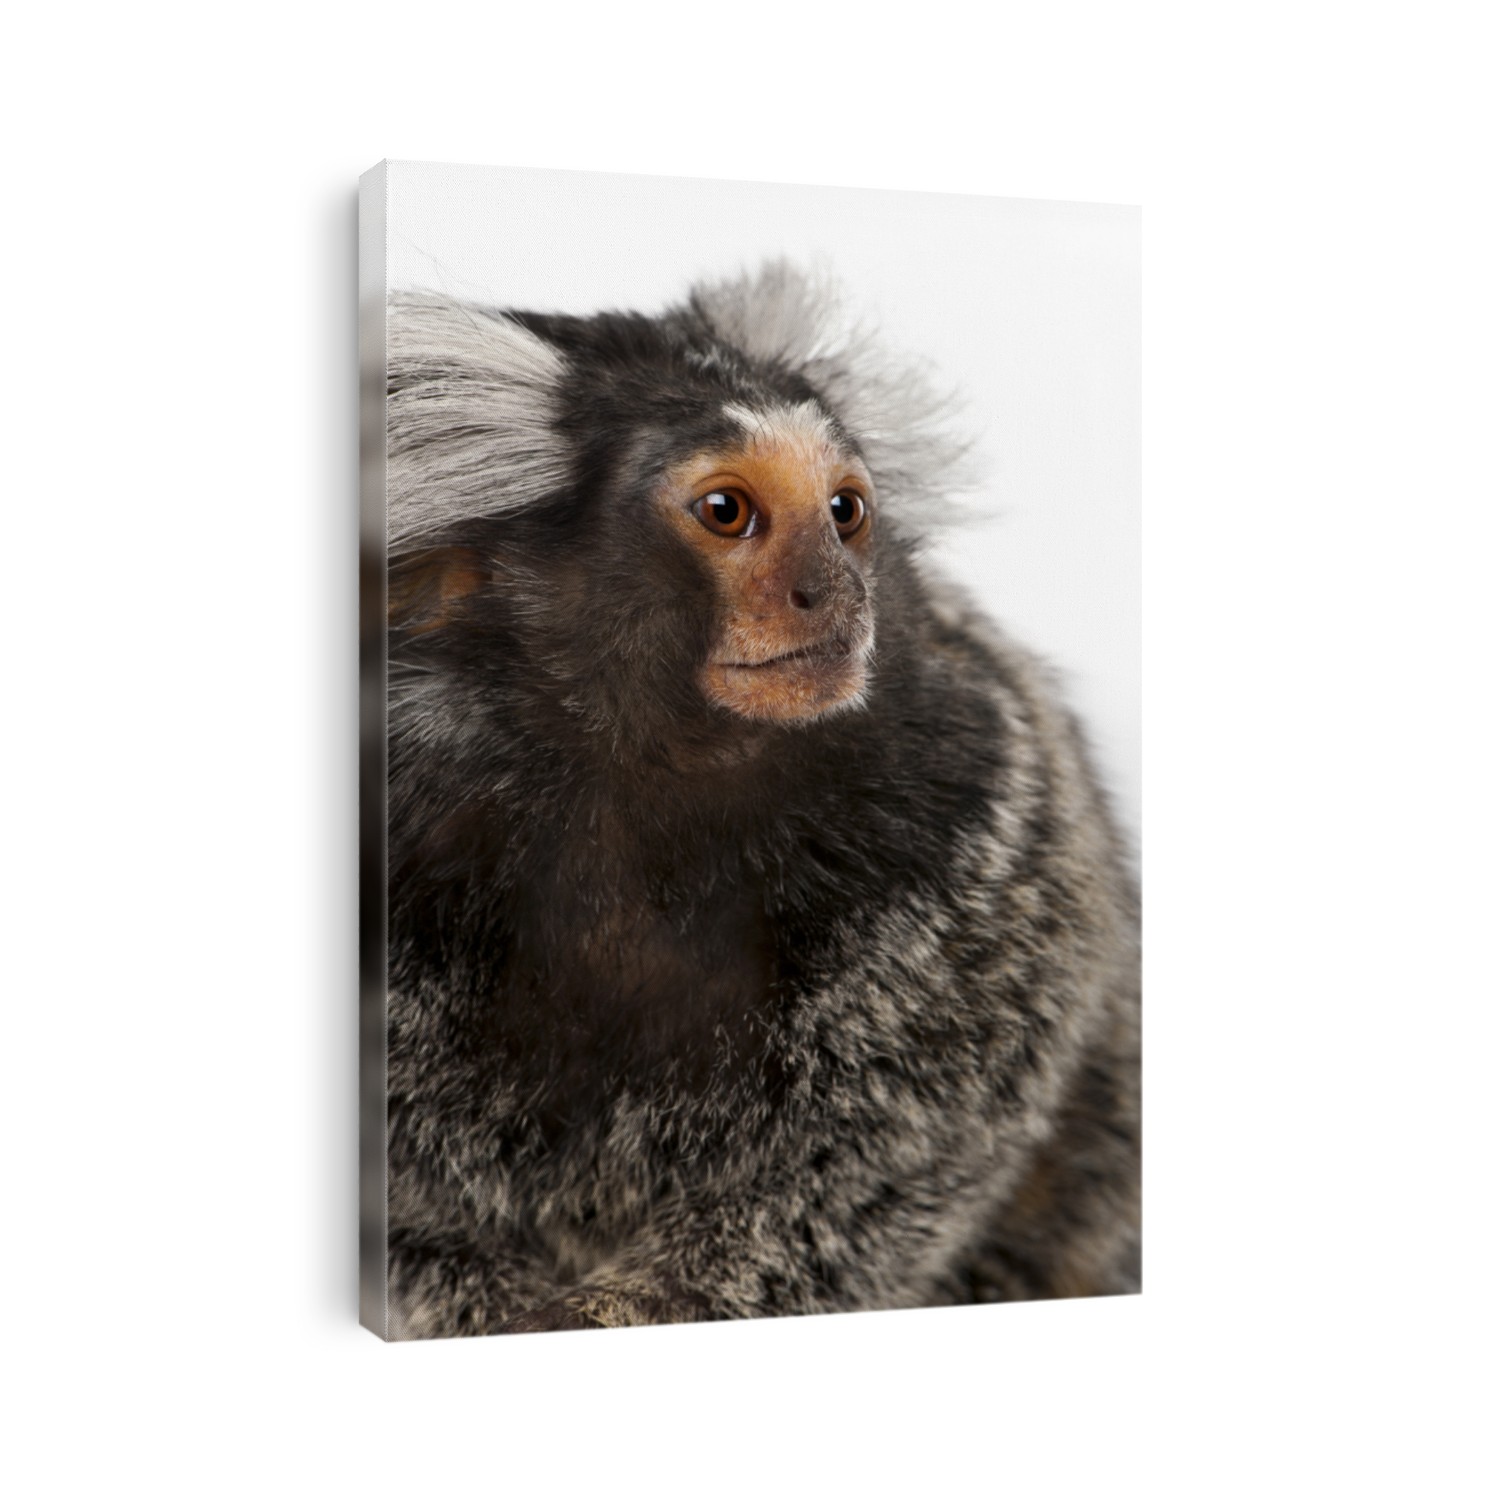 Common Marmoset, Callithrix jacchus, 2 years old, in front of white background